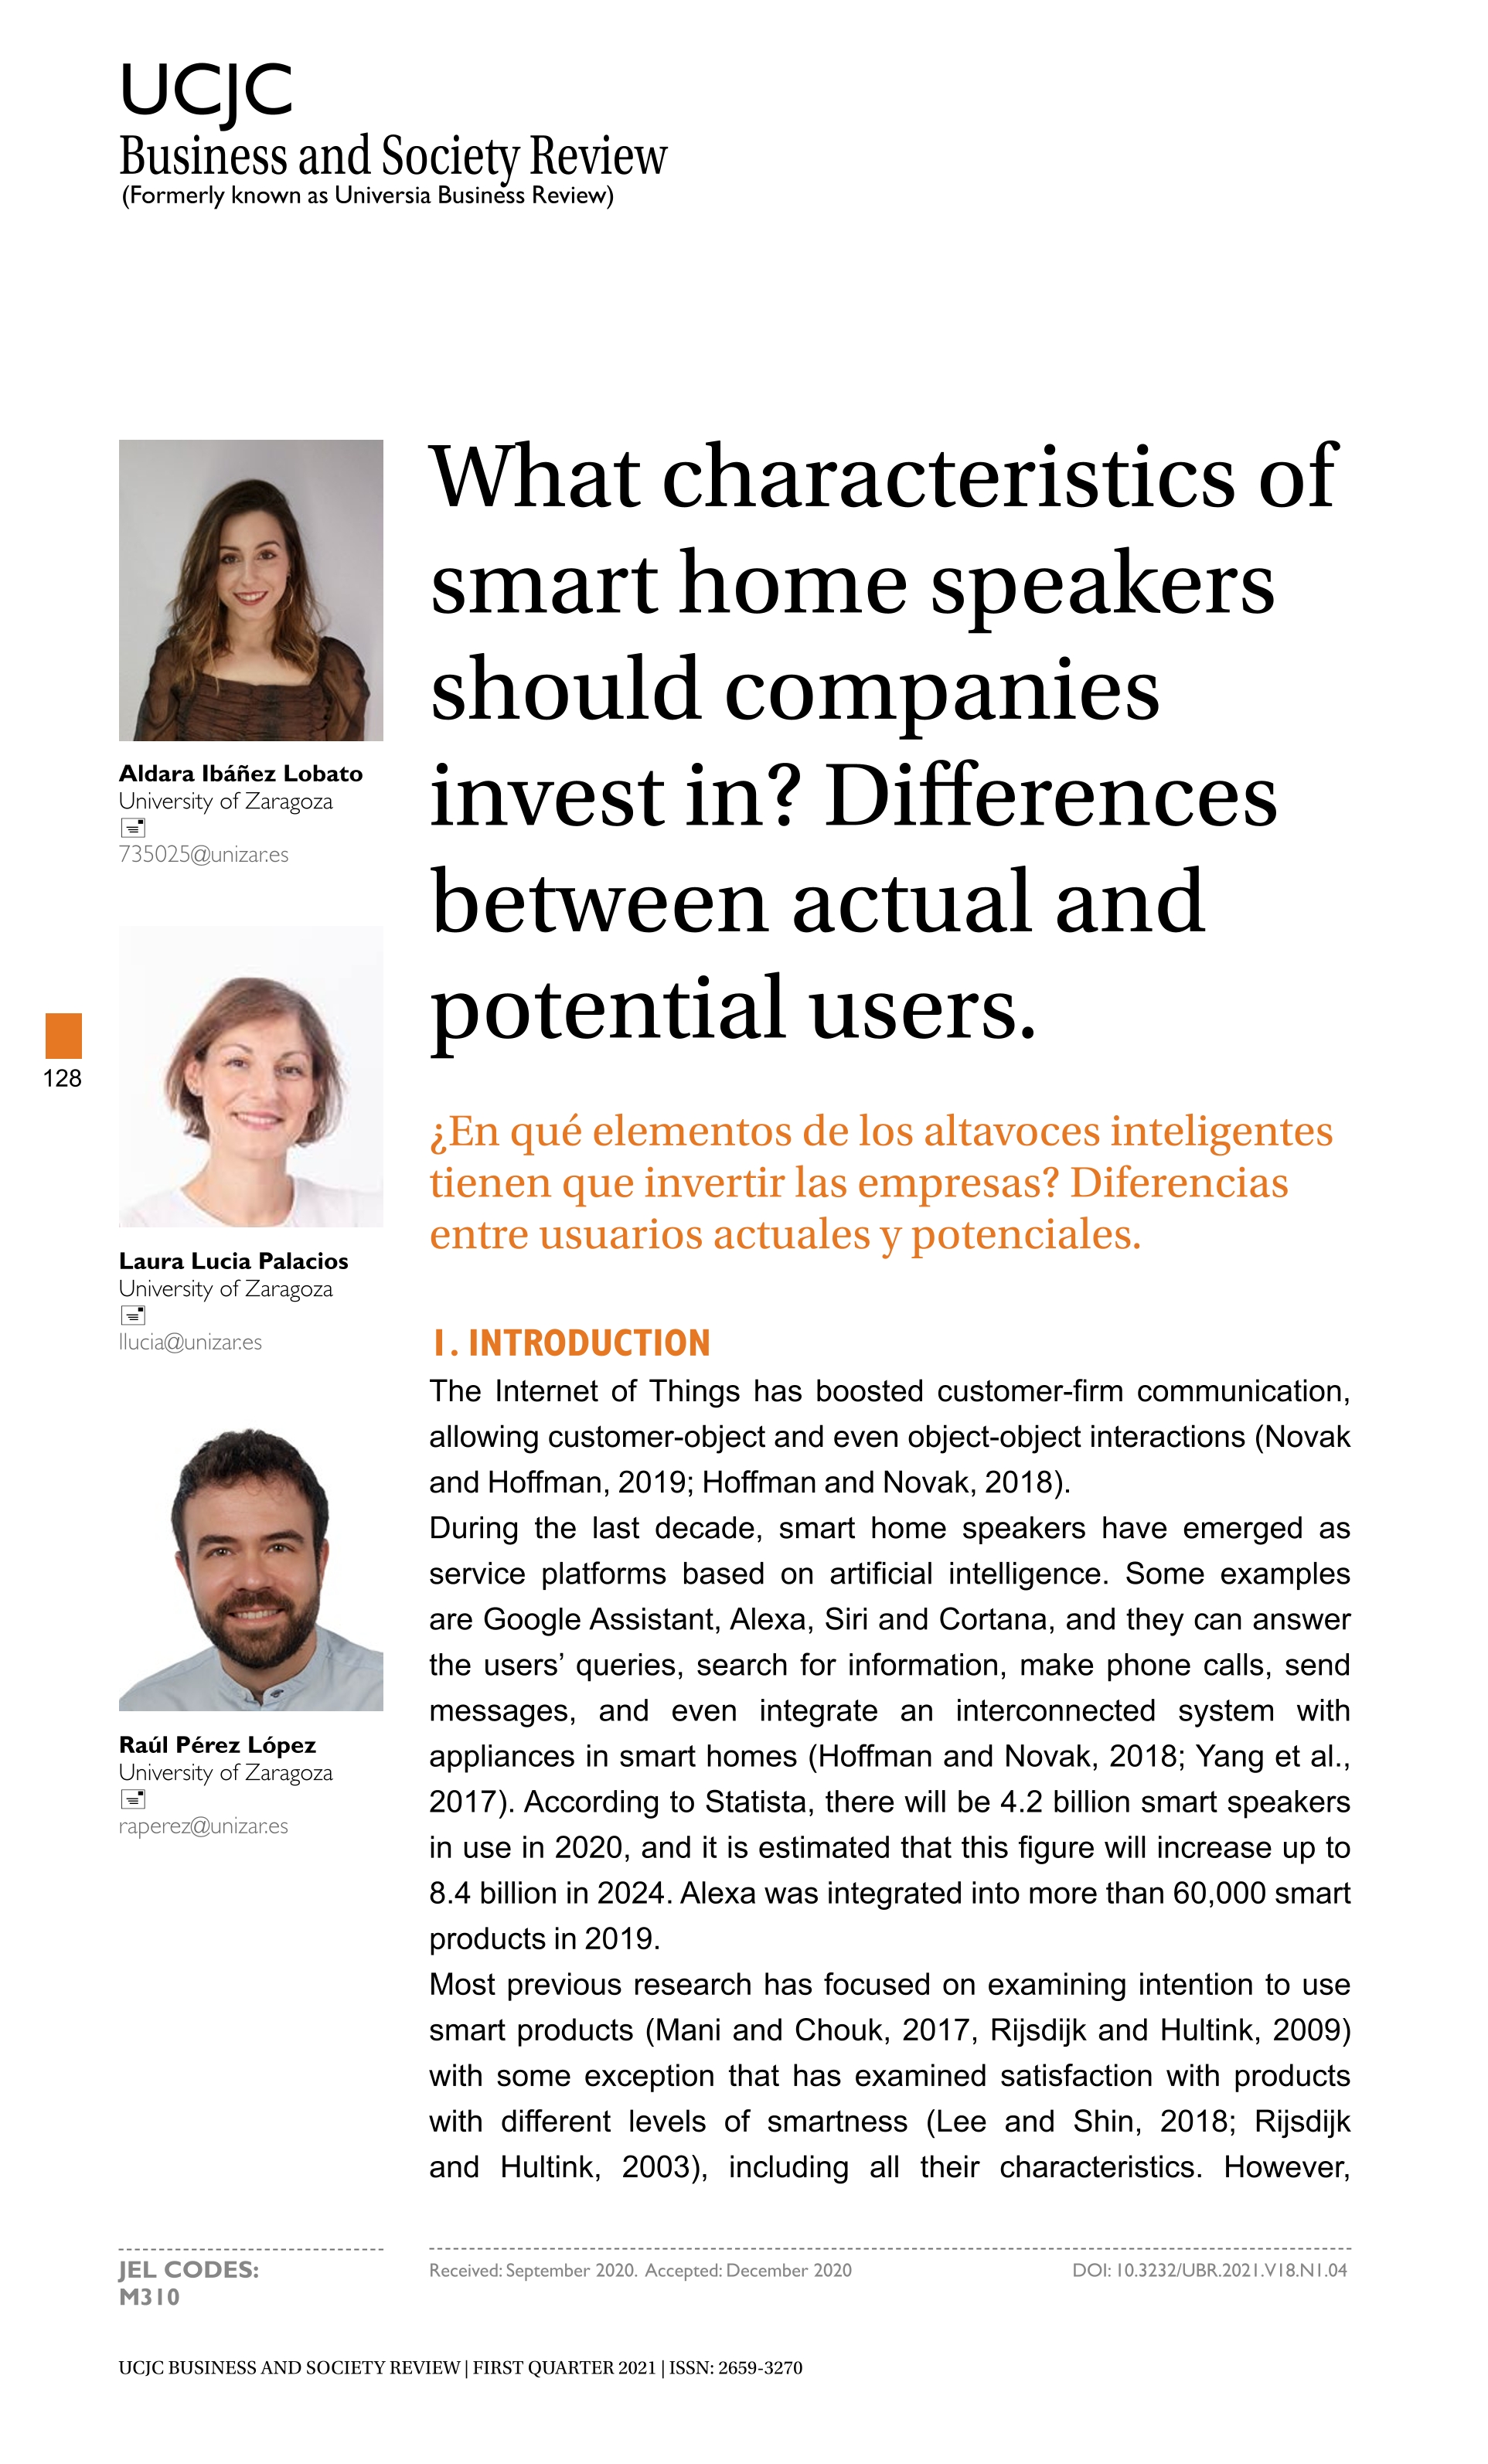 What characteristics of smart home speakers should companies invest in? Differences between actual and potential users